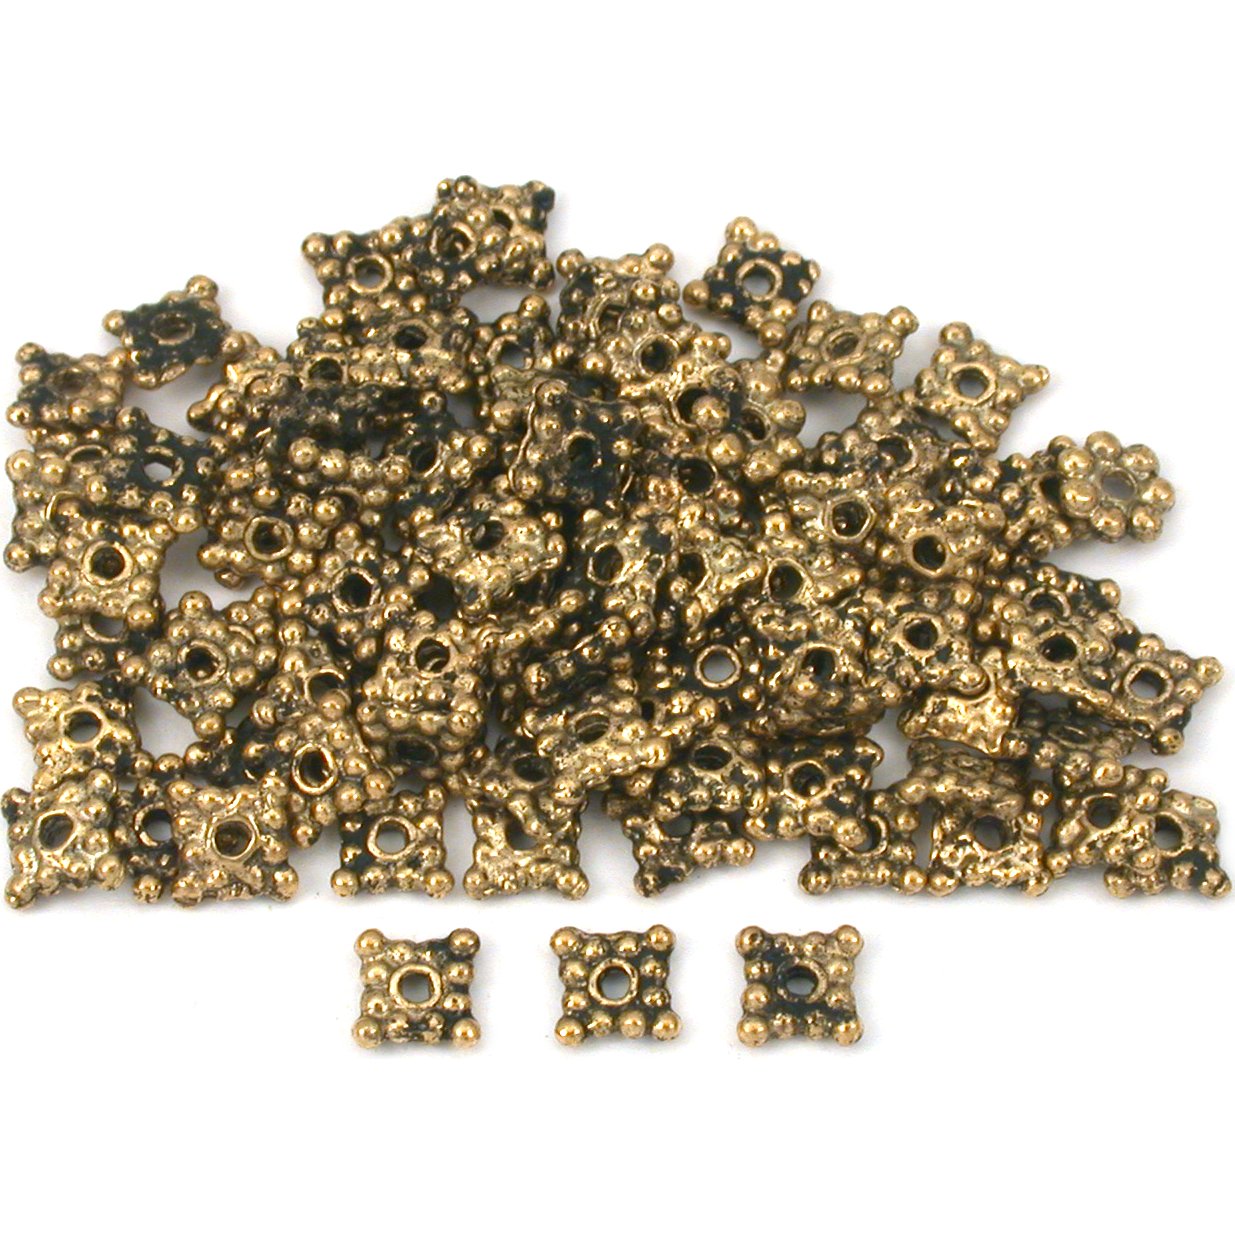 Bali Spacer Square Antique Gold Plated Beads 5mm 95Pcs Approx.